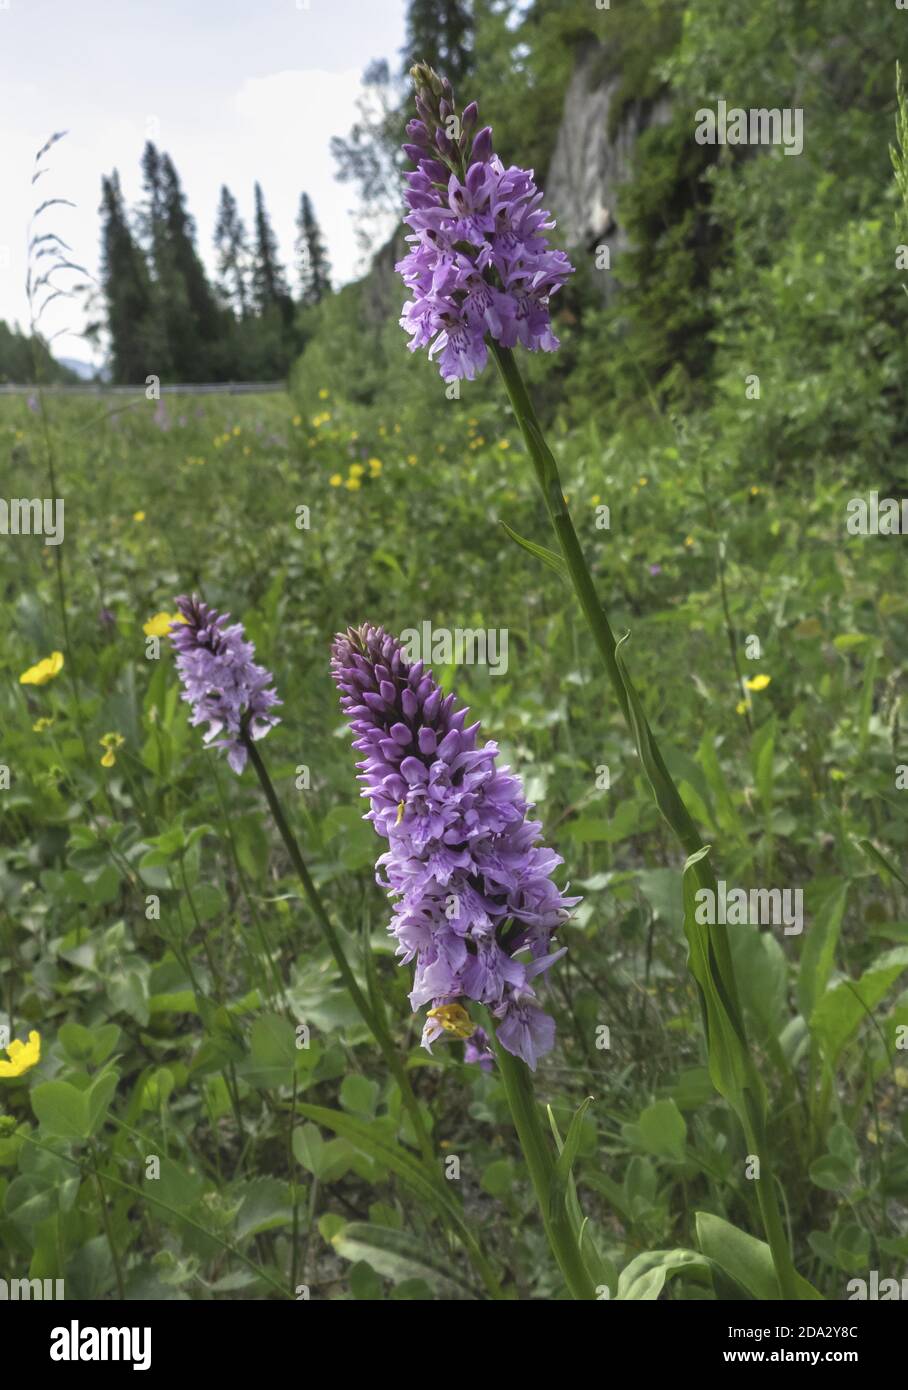 heath spotted orchid (Dactylorhiza maculata s.l.), blooming in a meadow, Norway, Nord-Troendelag, Namskogan Stock Photo